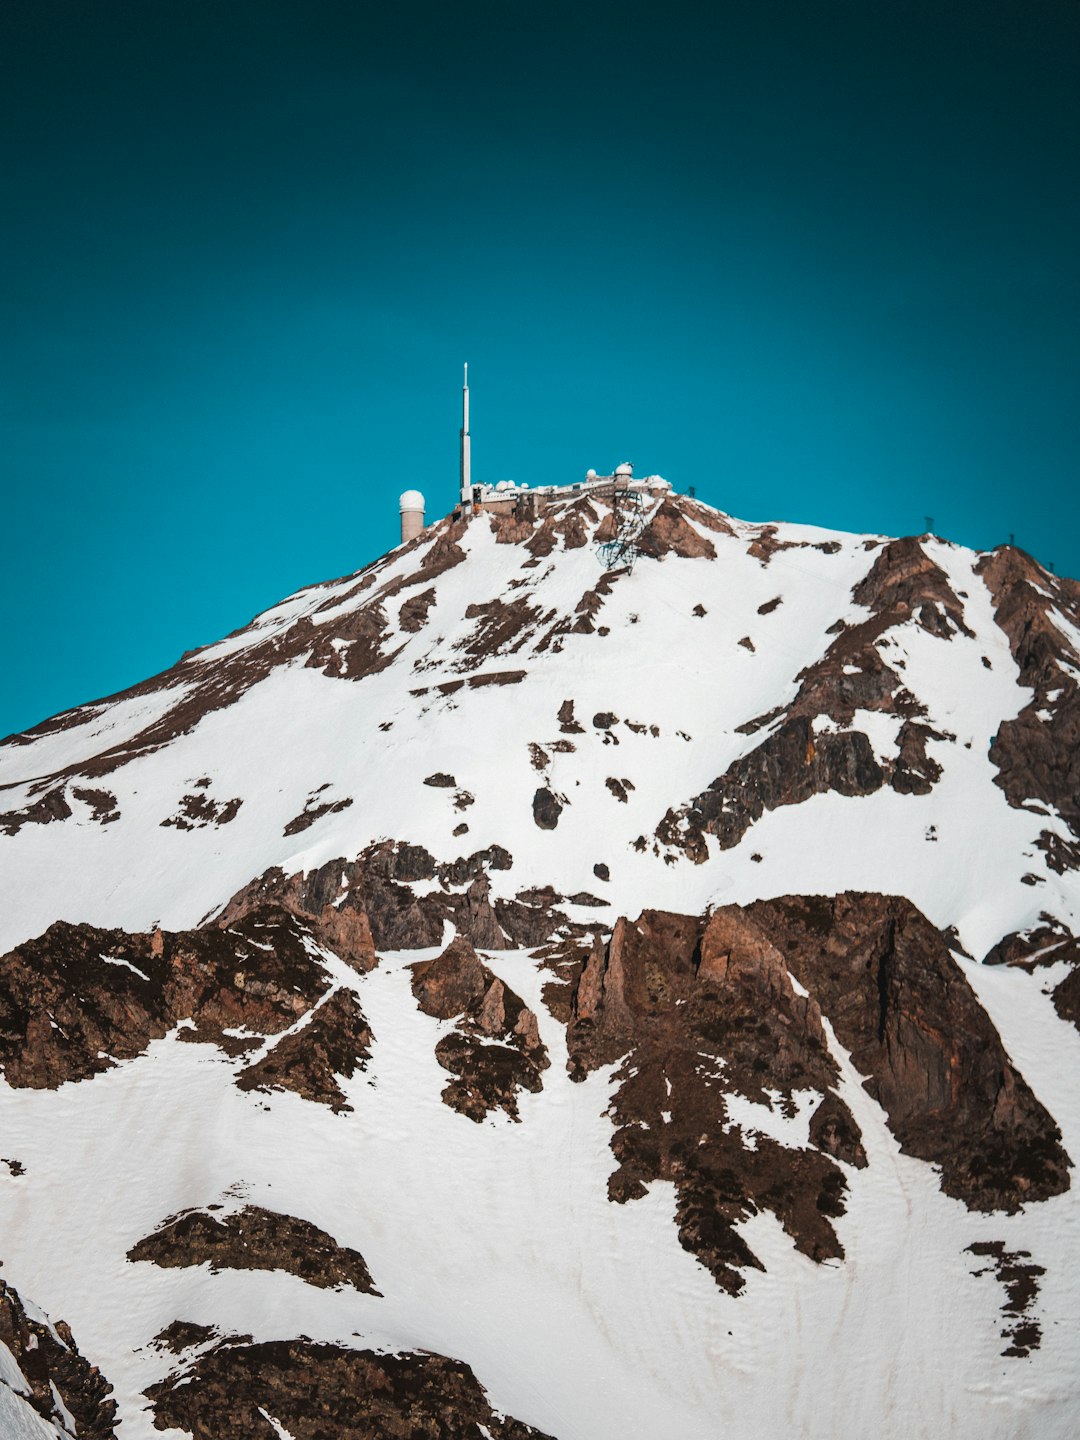 travelers stories about Summit in Pic du Midi de Bigorre, France